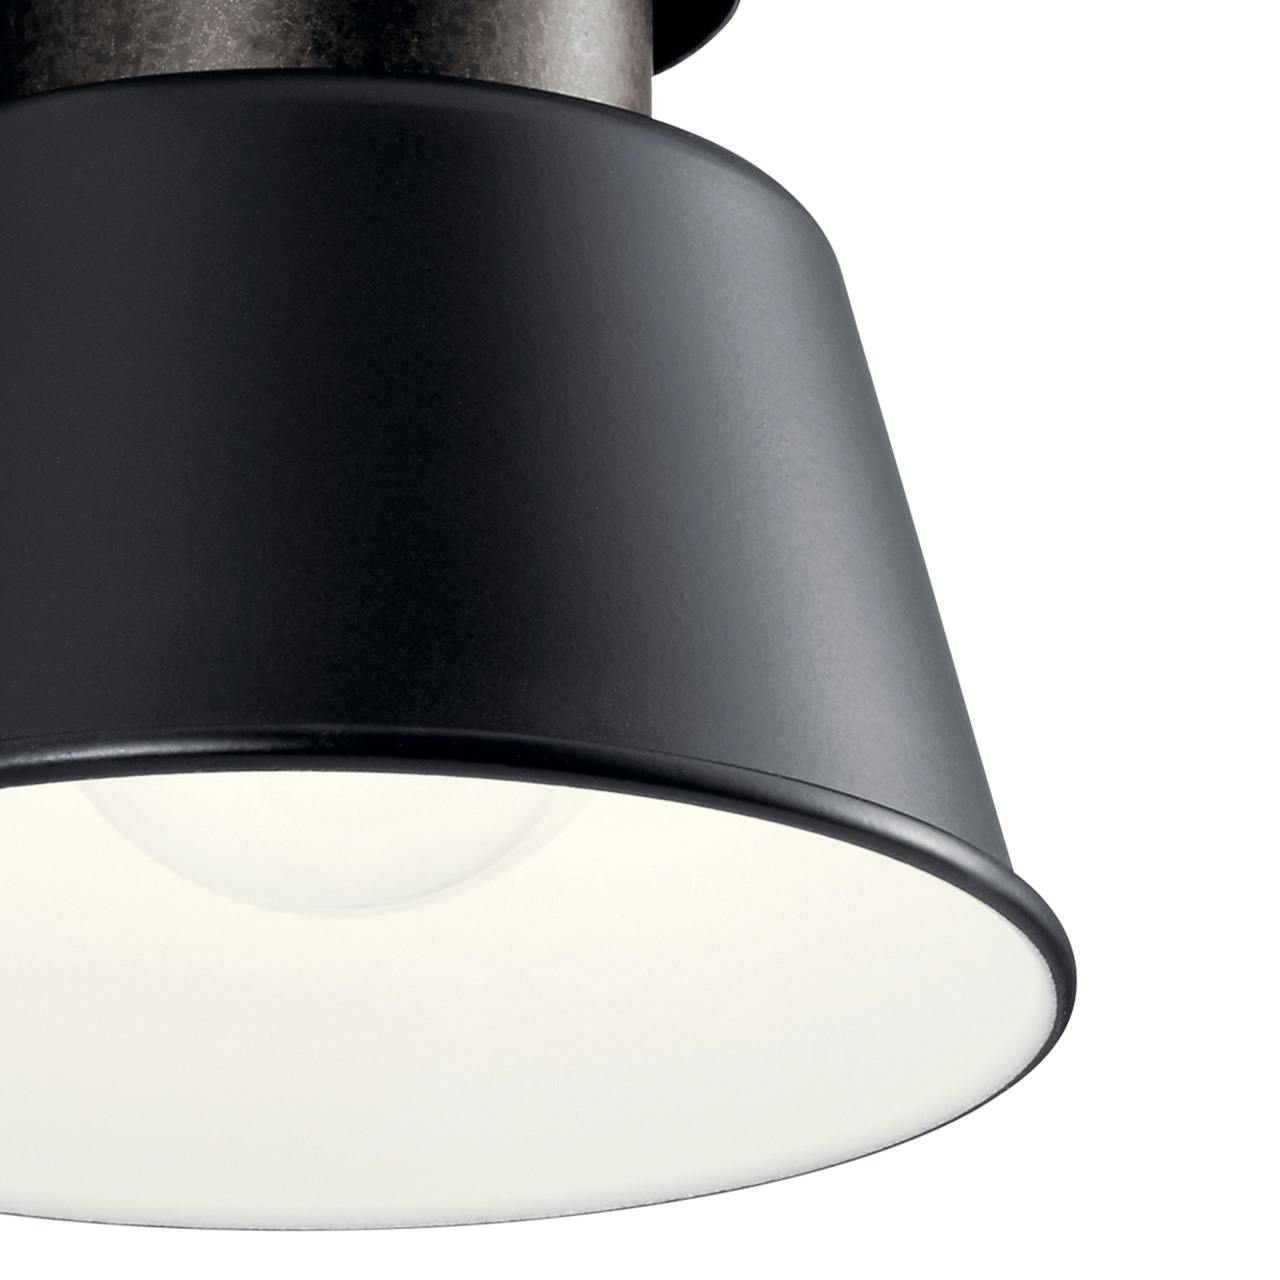 Close up view of the Lozano 8" 1 Light Wall Light Black on a white background